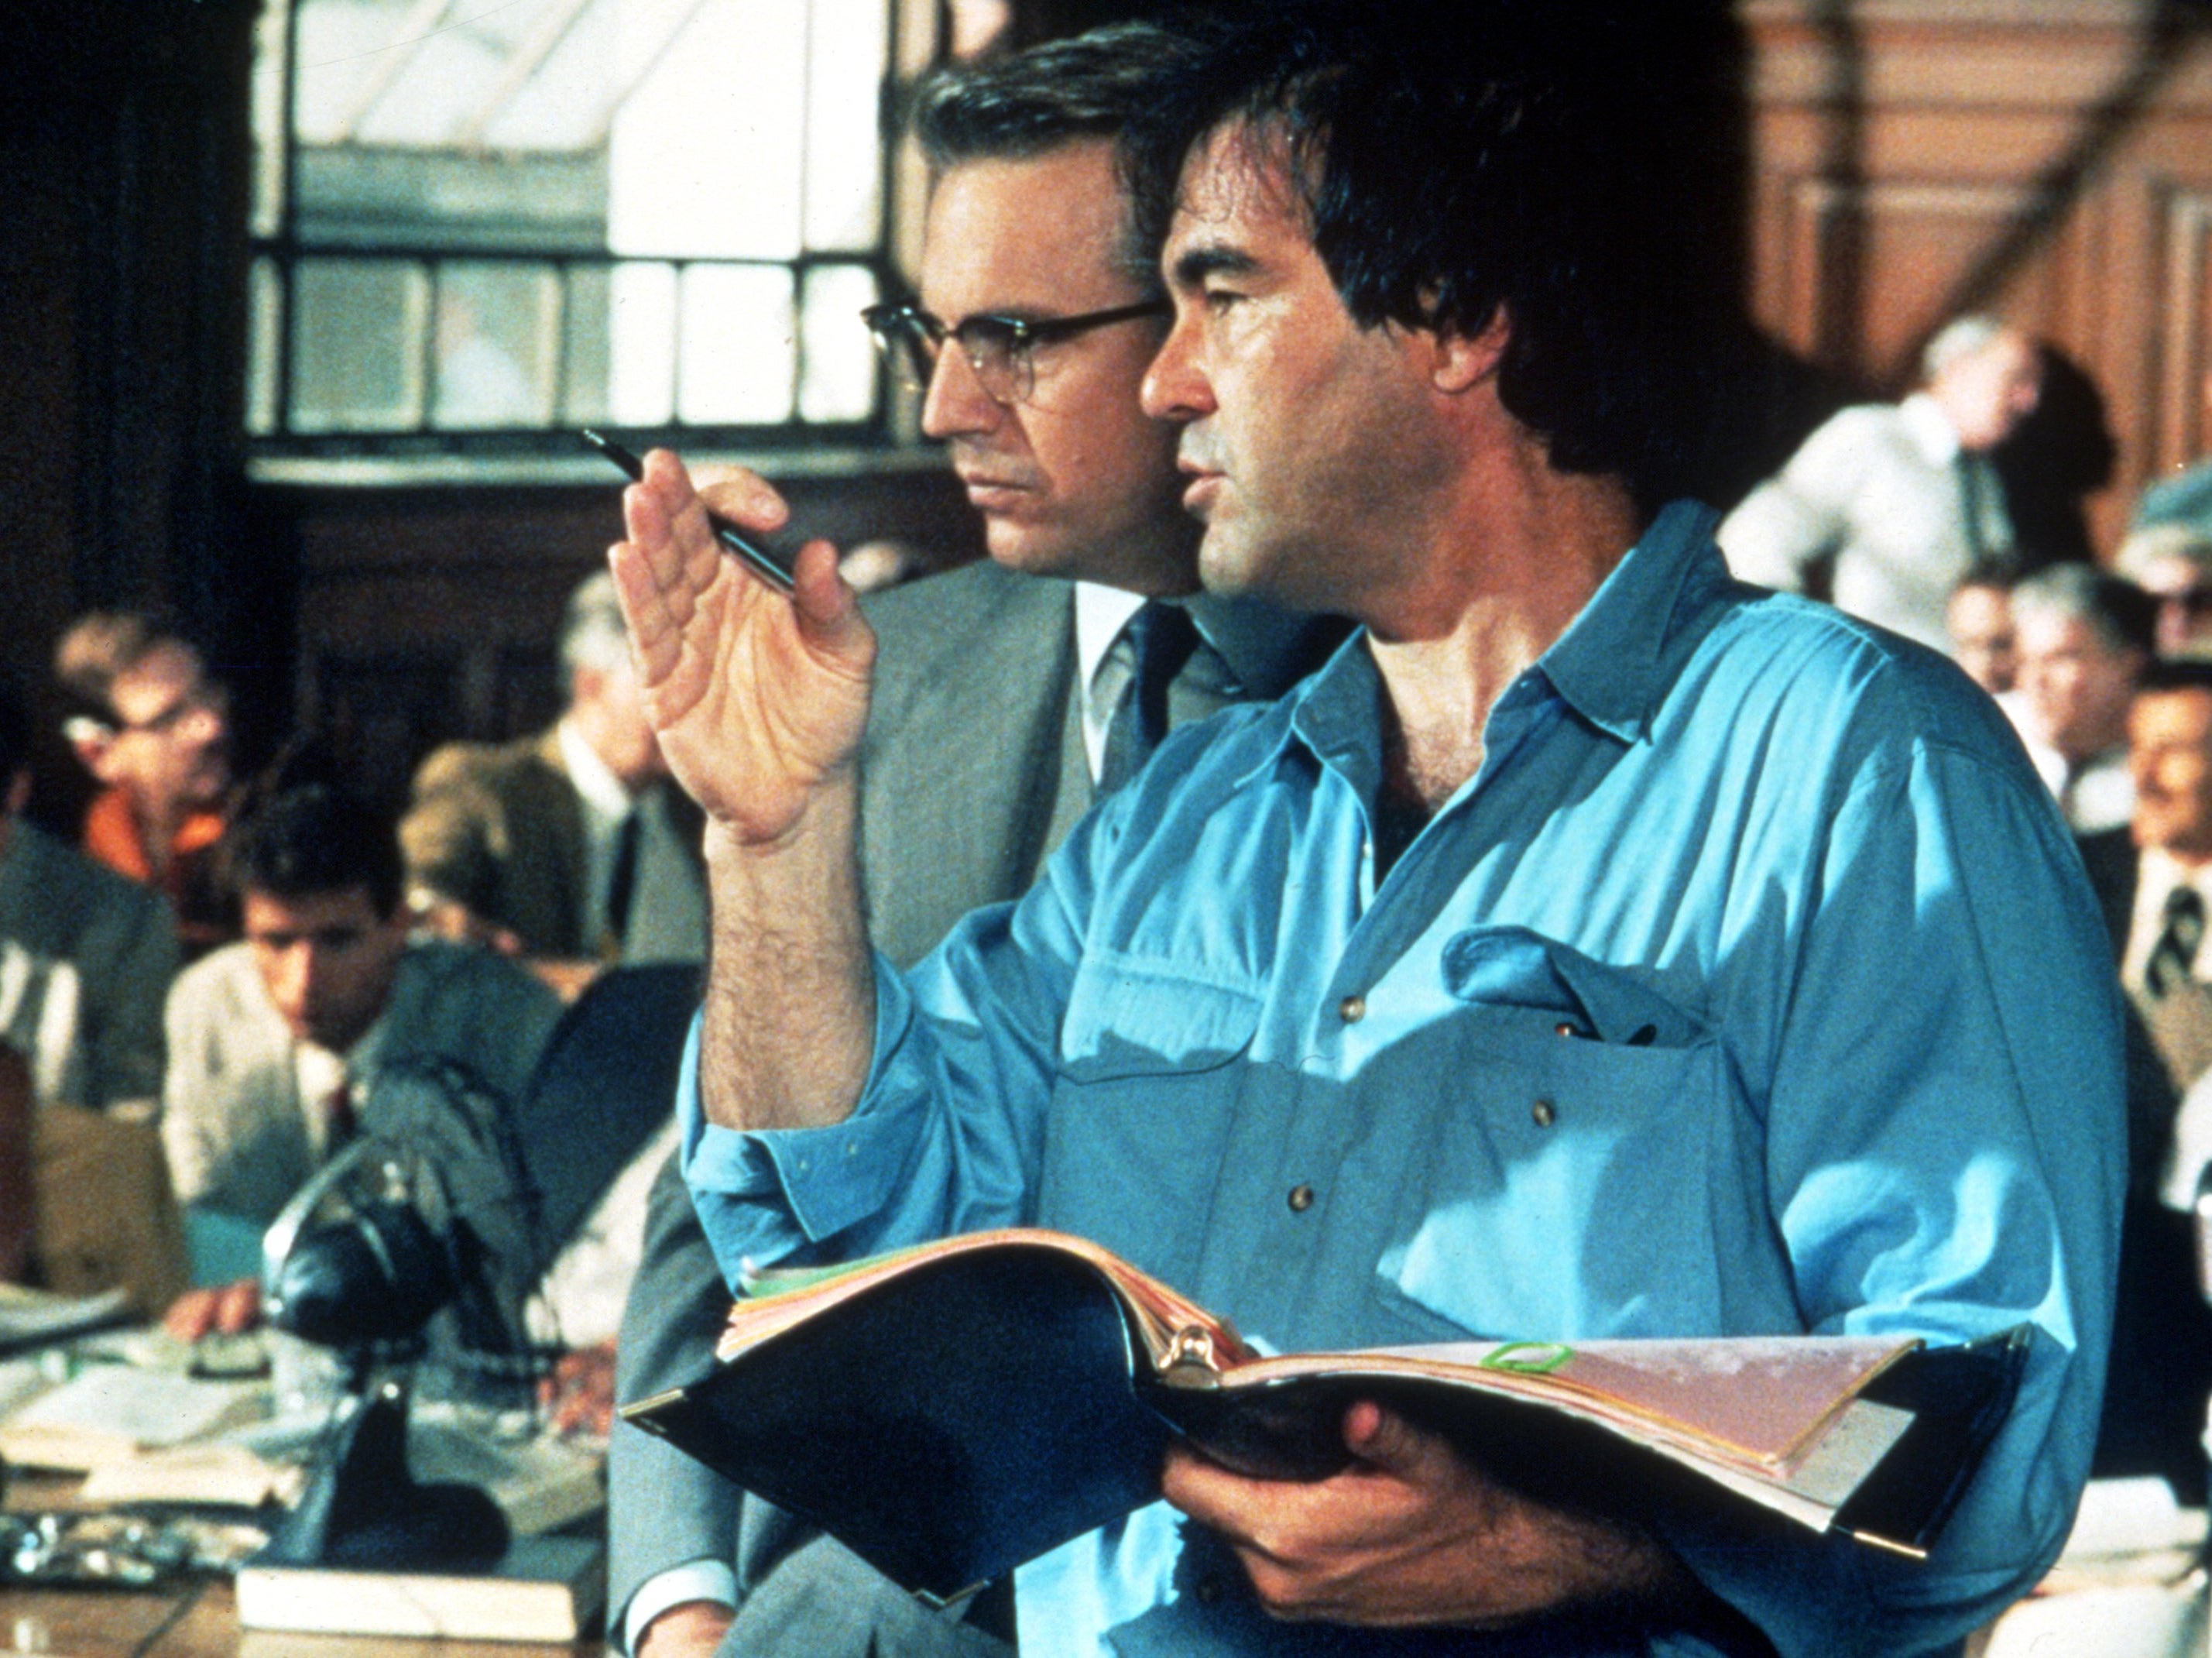 Kevin Costner on the set of ‘JFK’ with Oliver Stone, who was both praised and ridiculed when the film came out